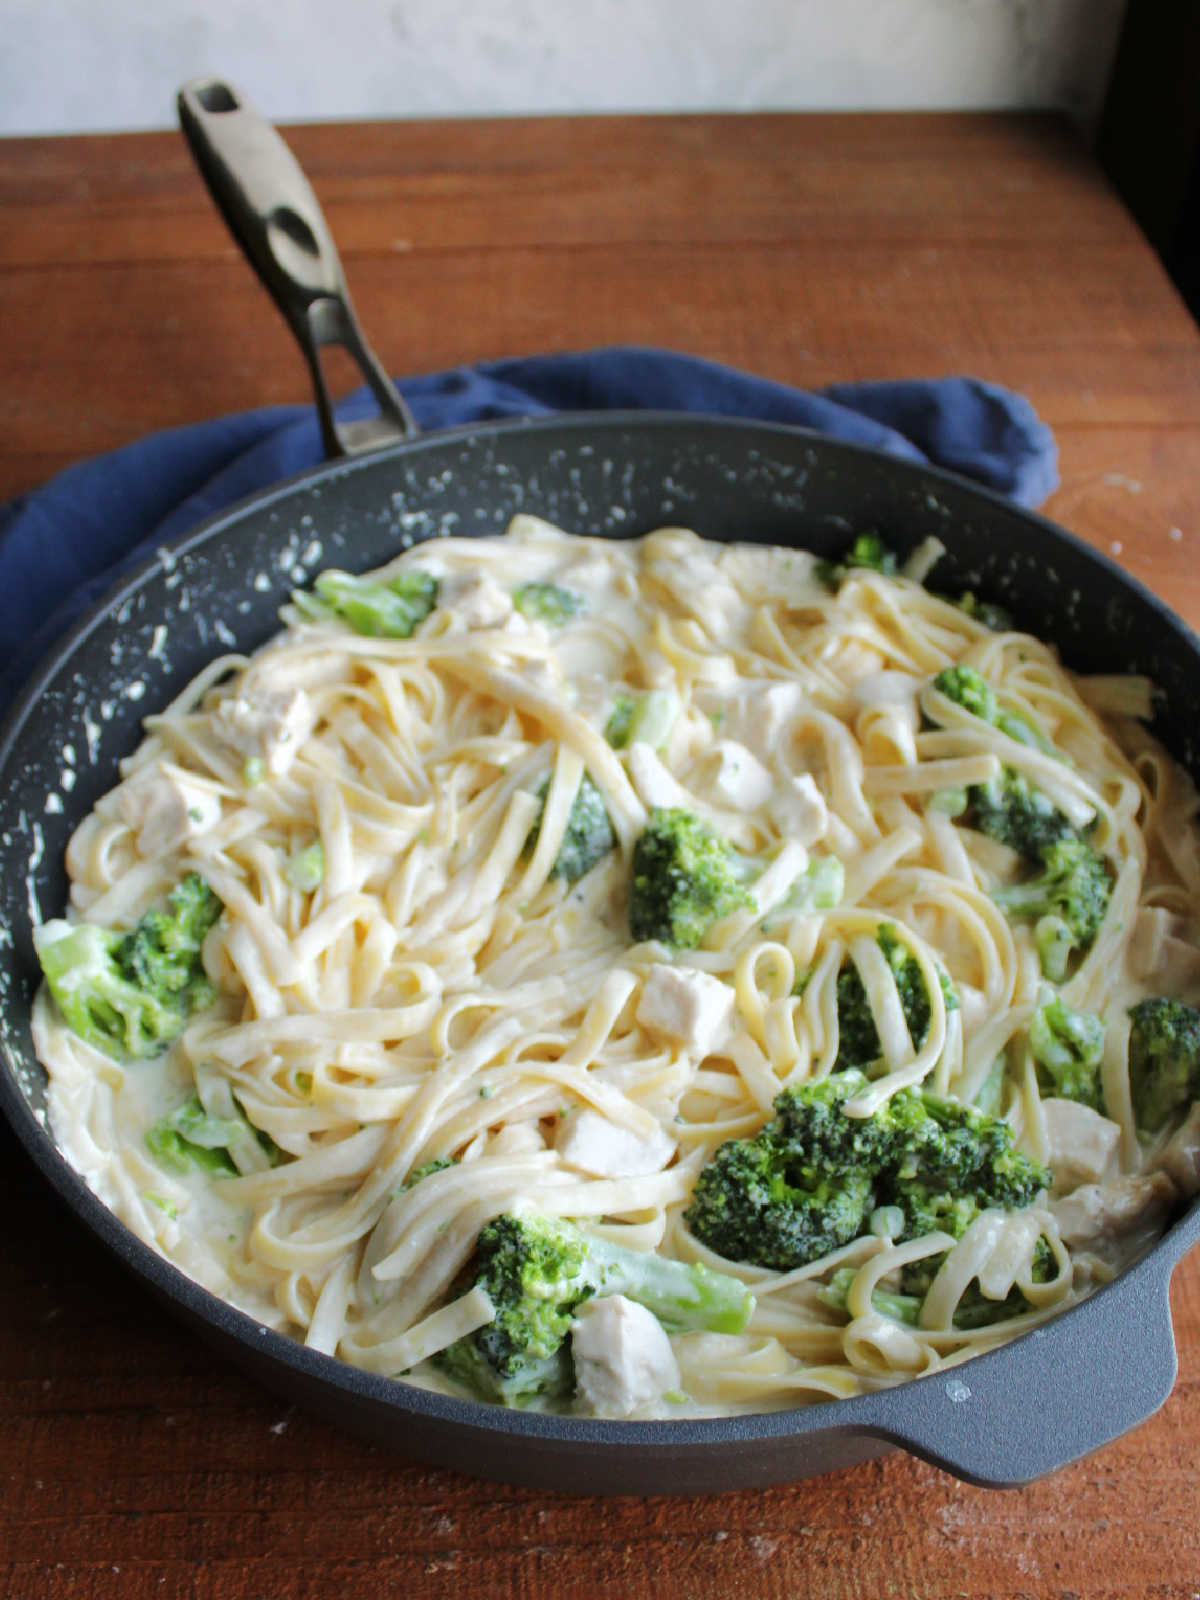 Pan of fettuccine alfredo with broccoli florets and chunks of chicken stirred in, ready to eat.